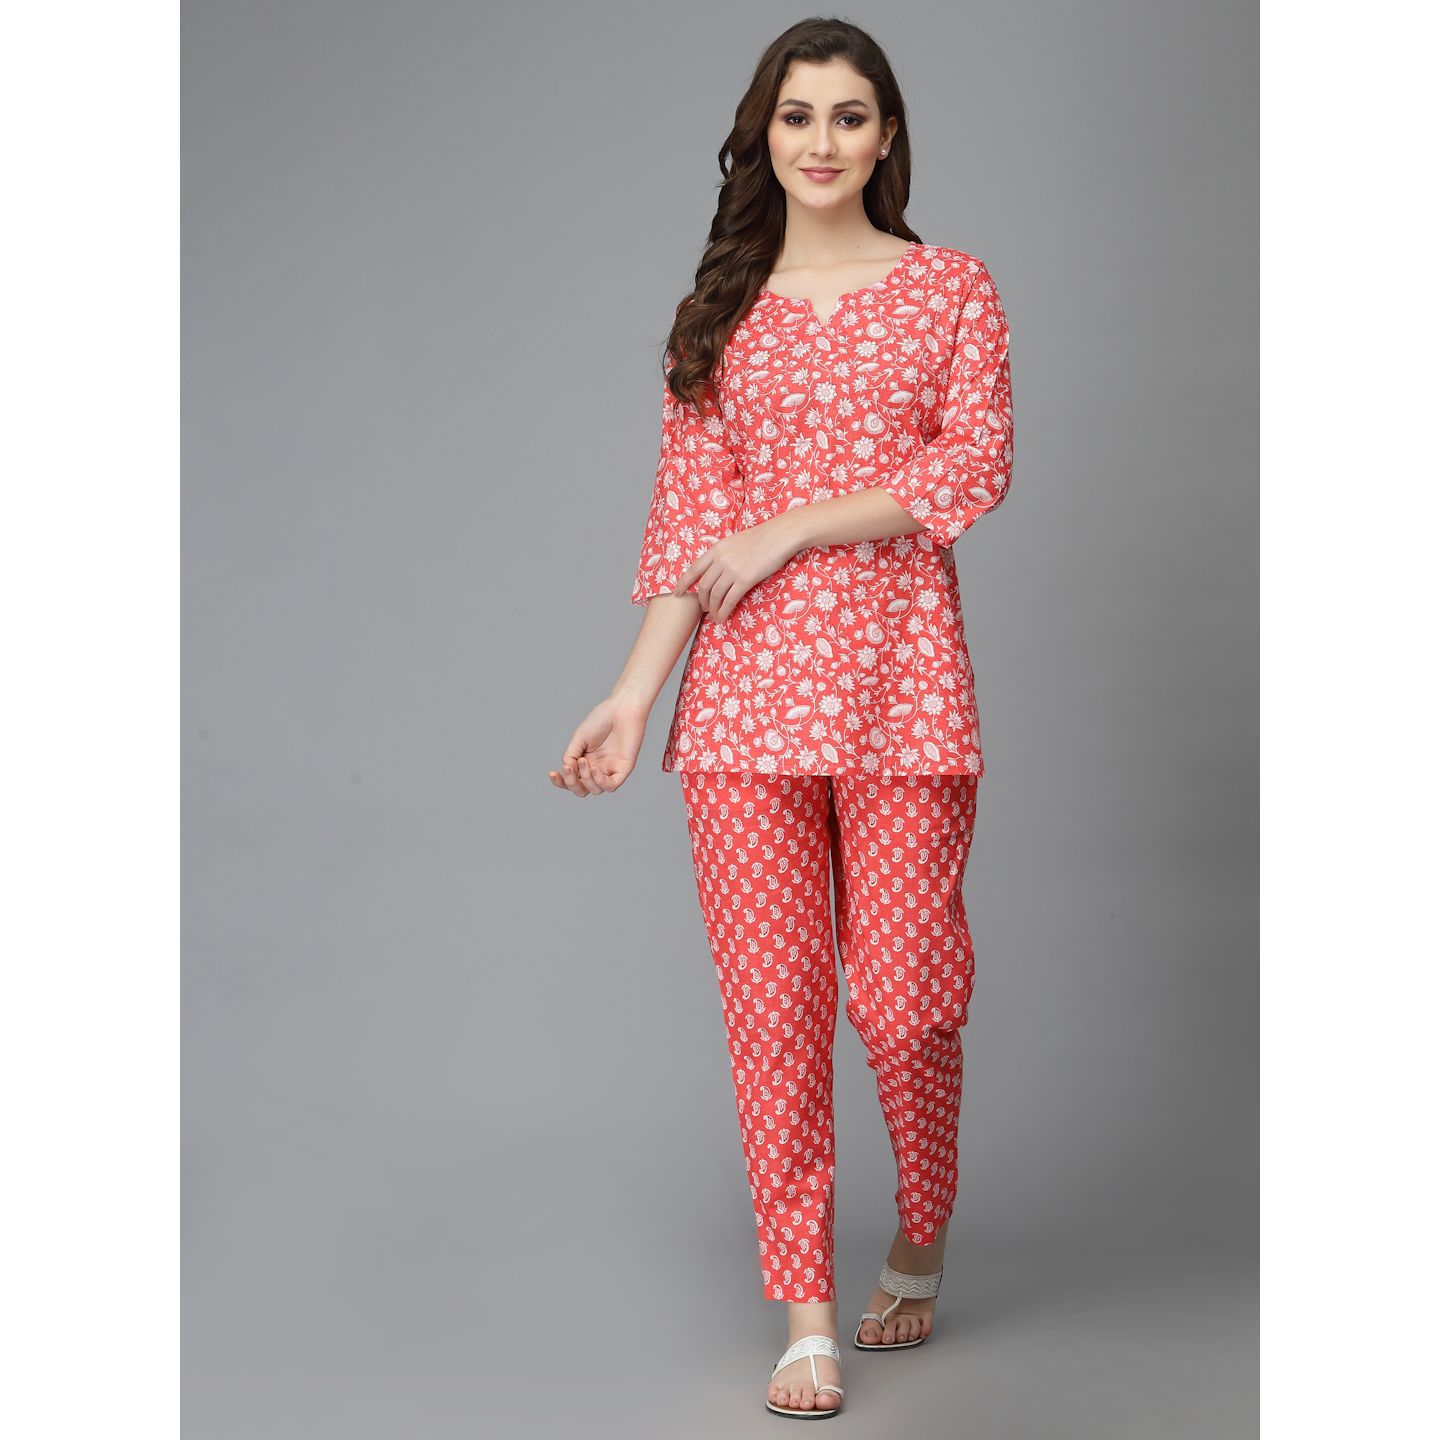 cotton Night Suits for Women